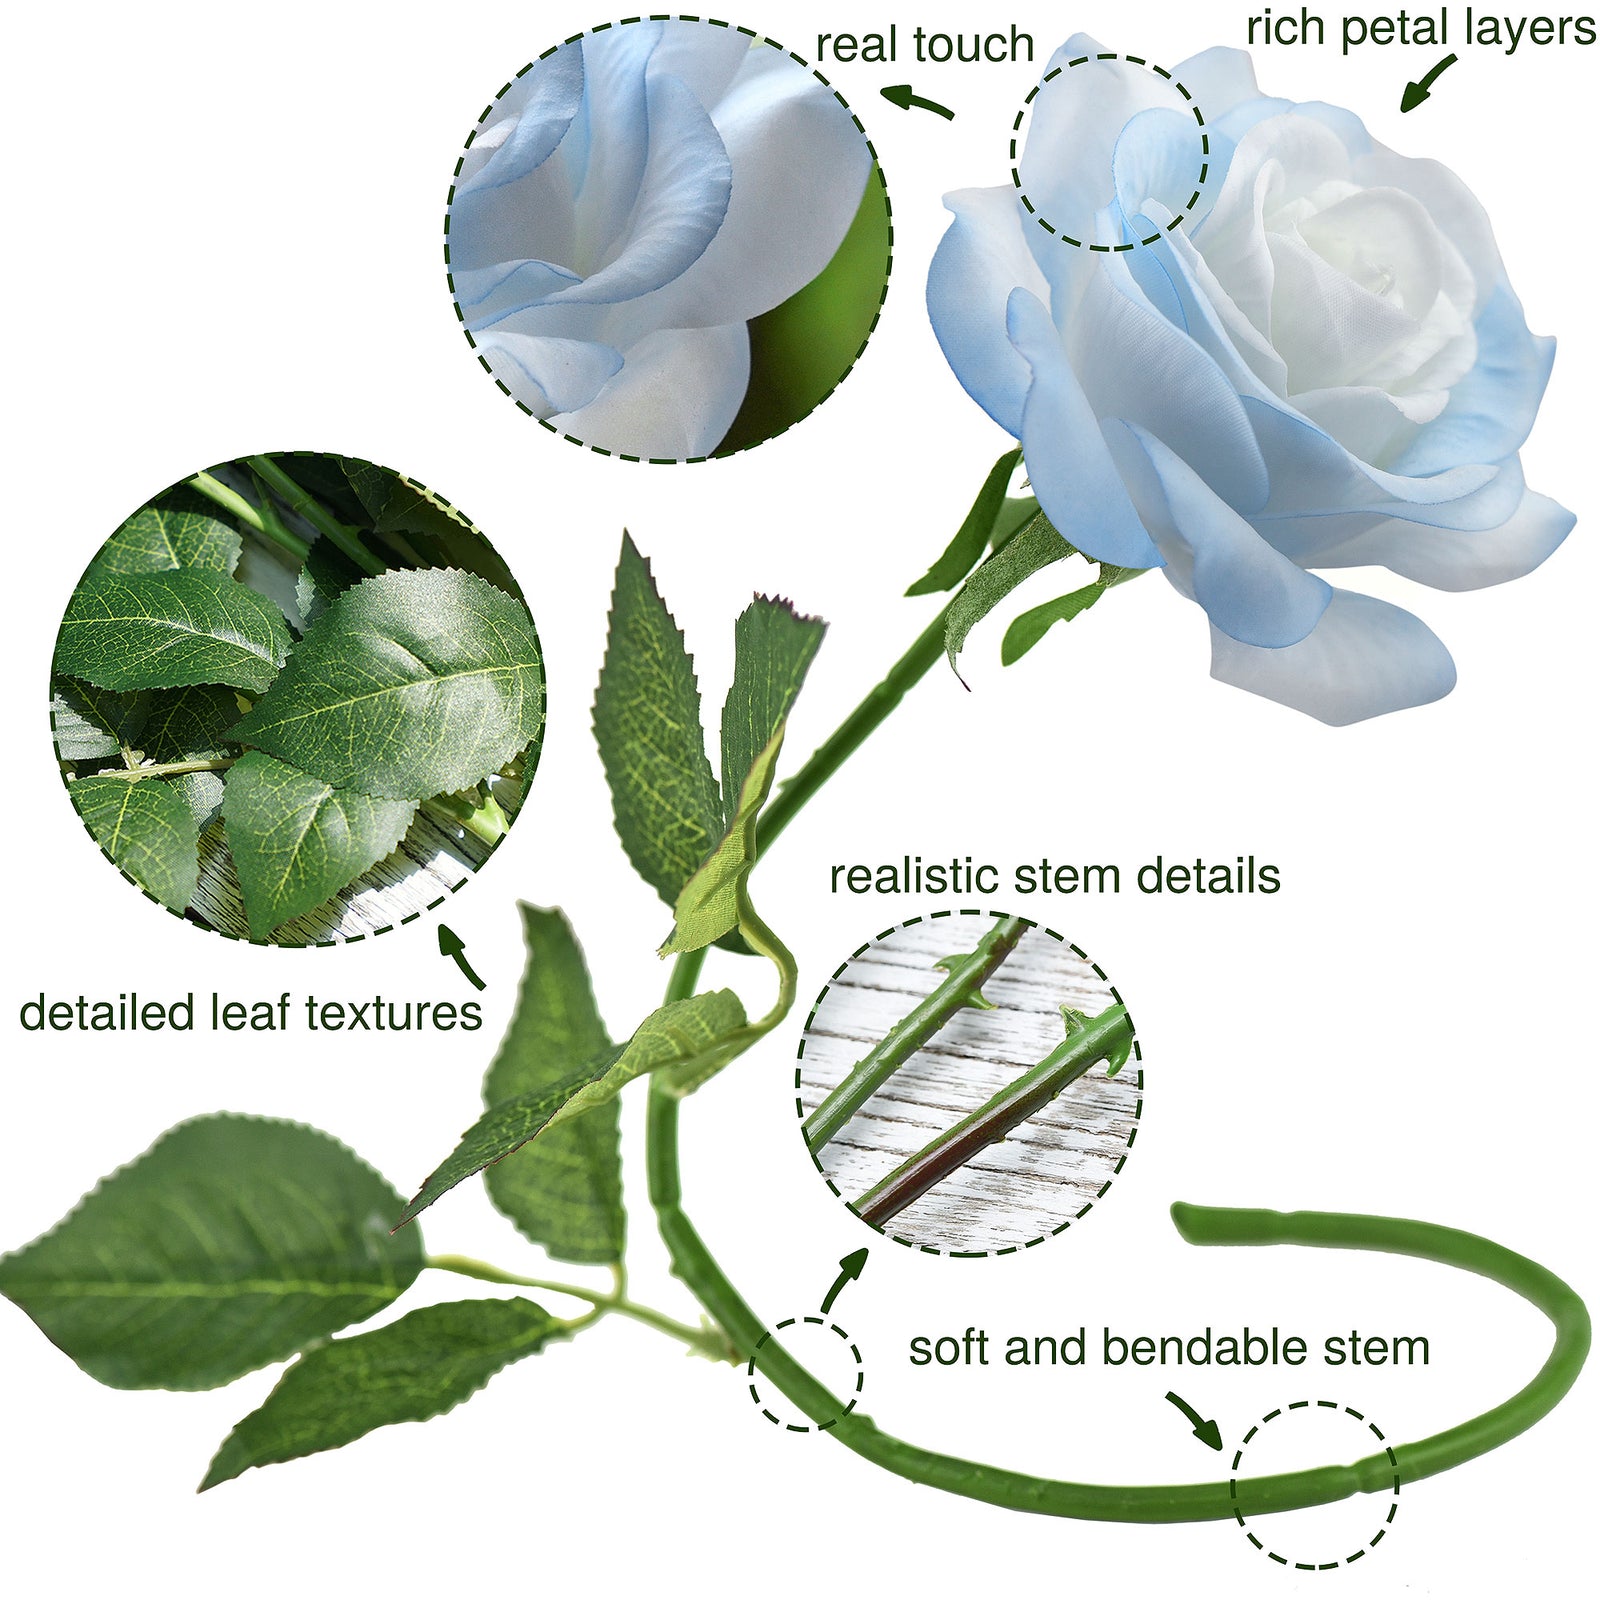 Real Touch Antarctic Icy Blue Roses Silk Artificial Flowers ‘Petals Feel and Look like Fresh Roses' Wedding, Bridal, Home Décor